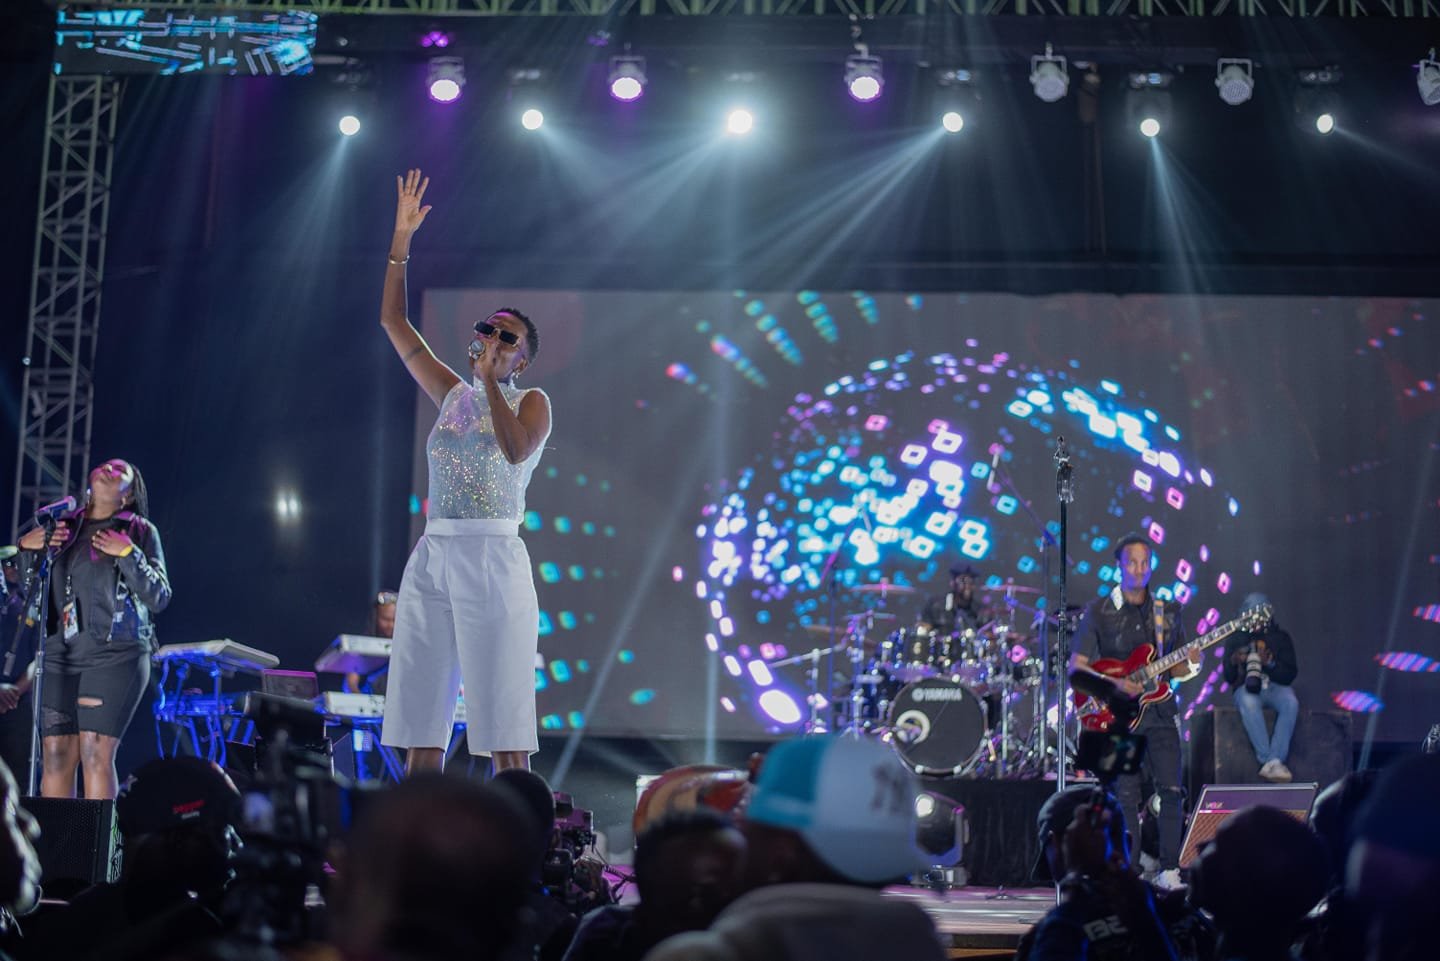 Azawi of Swangz Avenue delivers an outstanding performance during her debut show.